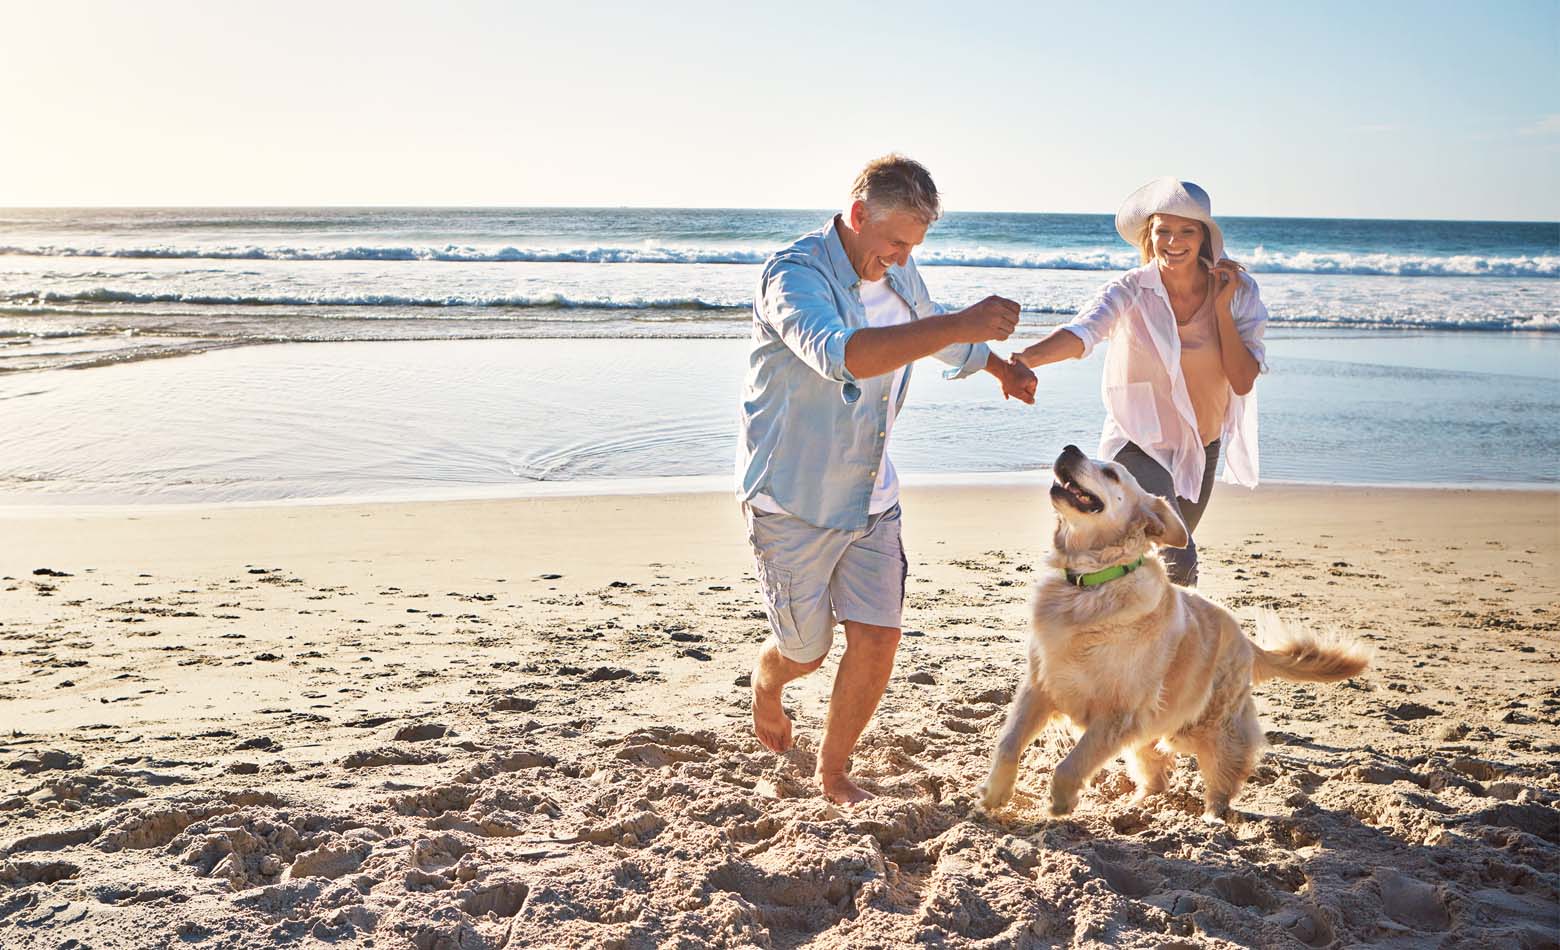 image-private-family-retired-couple-on-beach-with-dog-image-1-1